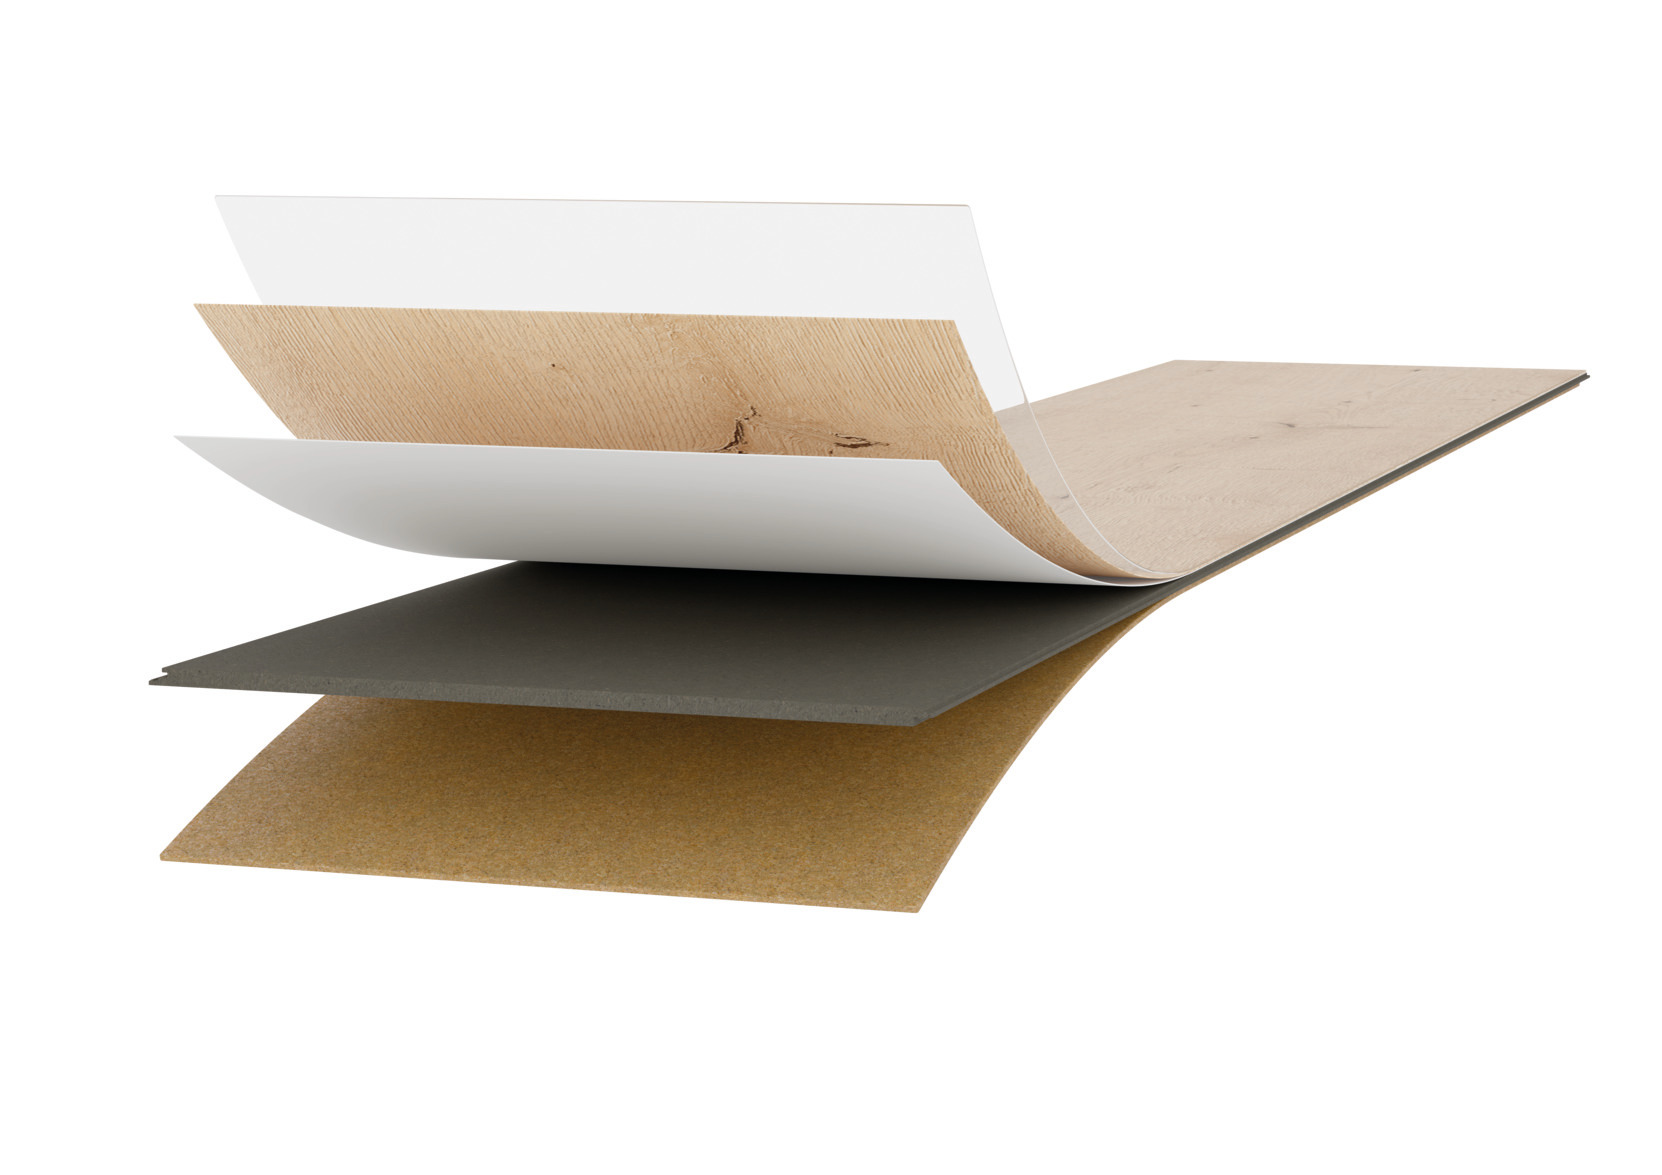 a. Puretec® Plus surface - PUR-based transparent polymer layer (PVC-free)
b. Decor layer
c. Base layer
d. Special AquaSafe board (swell-reduced) - on the basis of natural, renewable materials
e. AquaStop edge impregnation
f. 1 mm cork sound-absorbing cushion